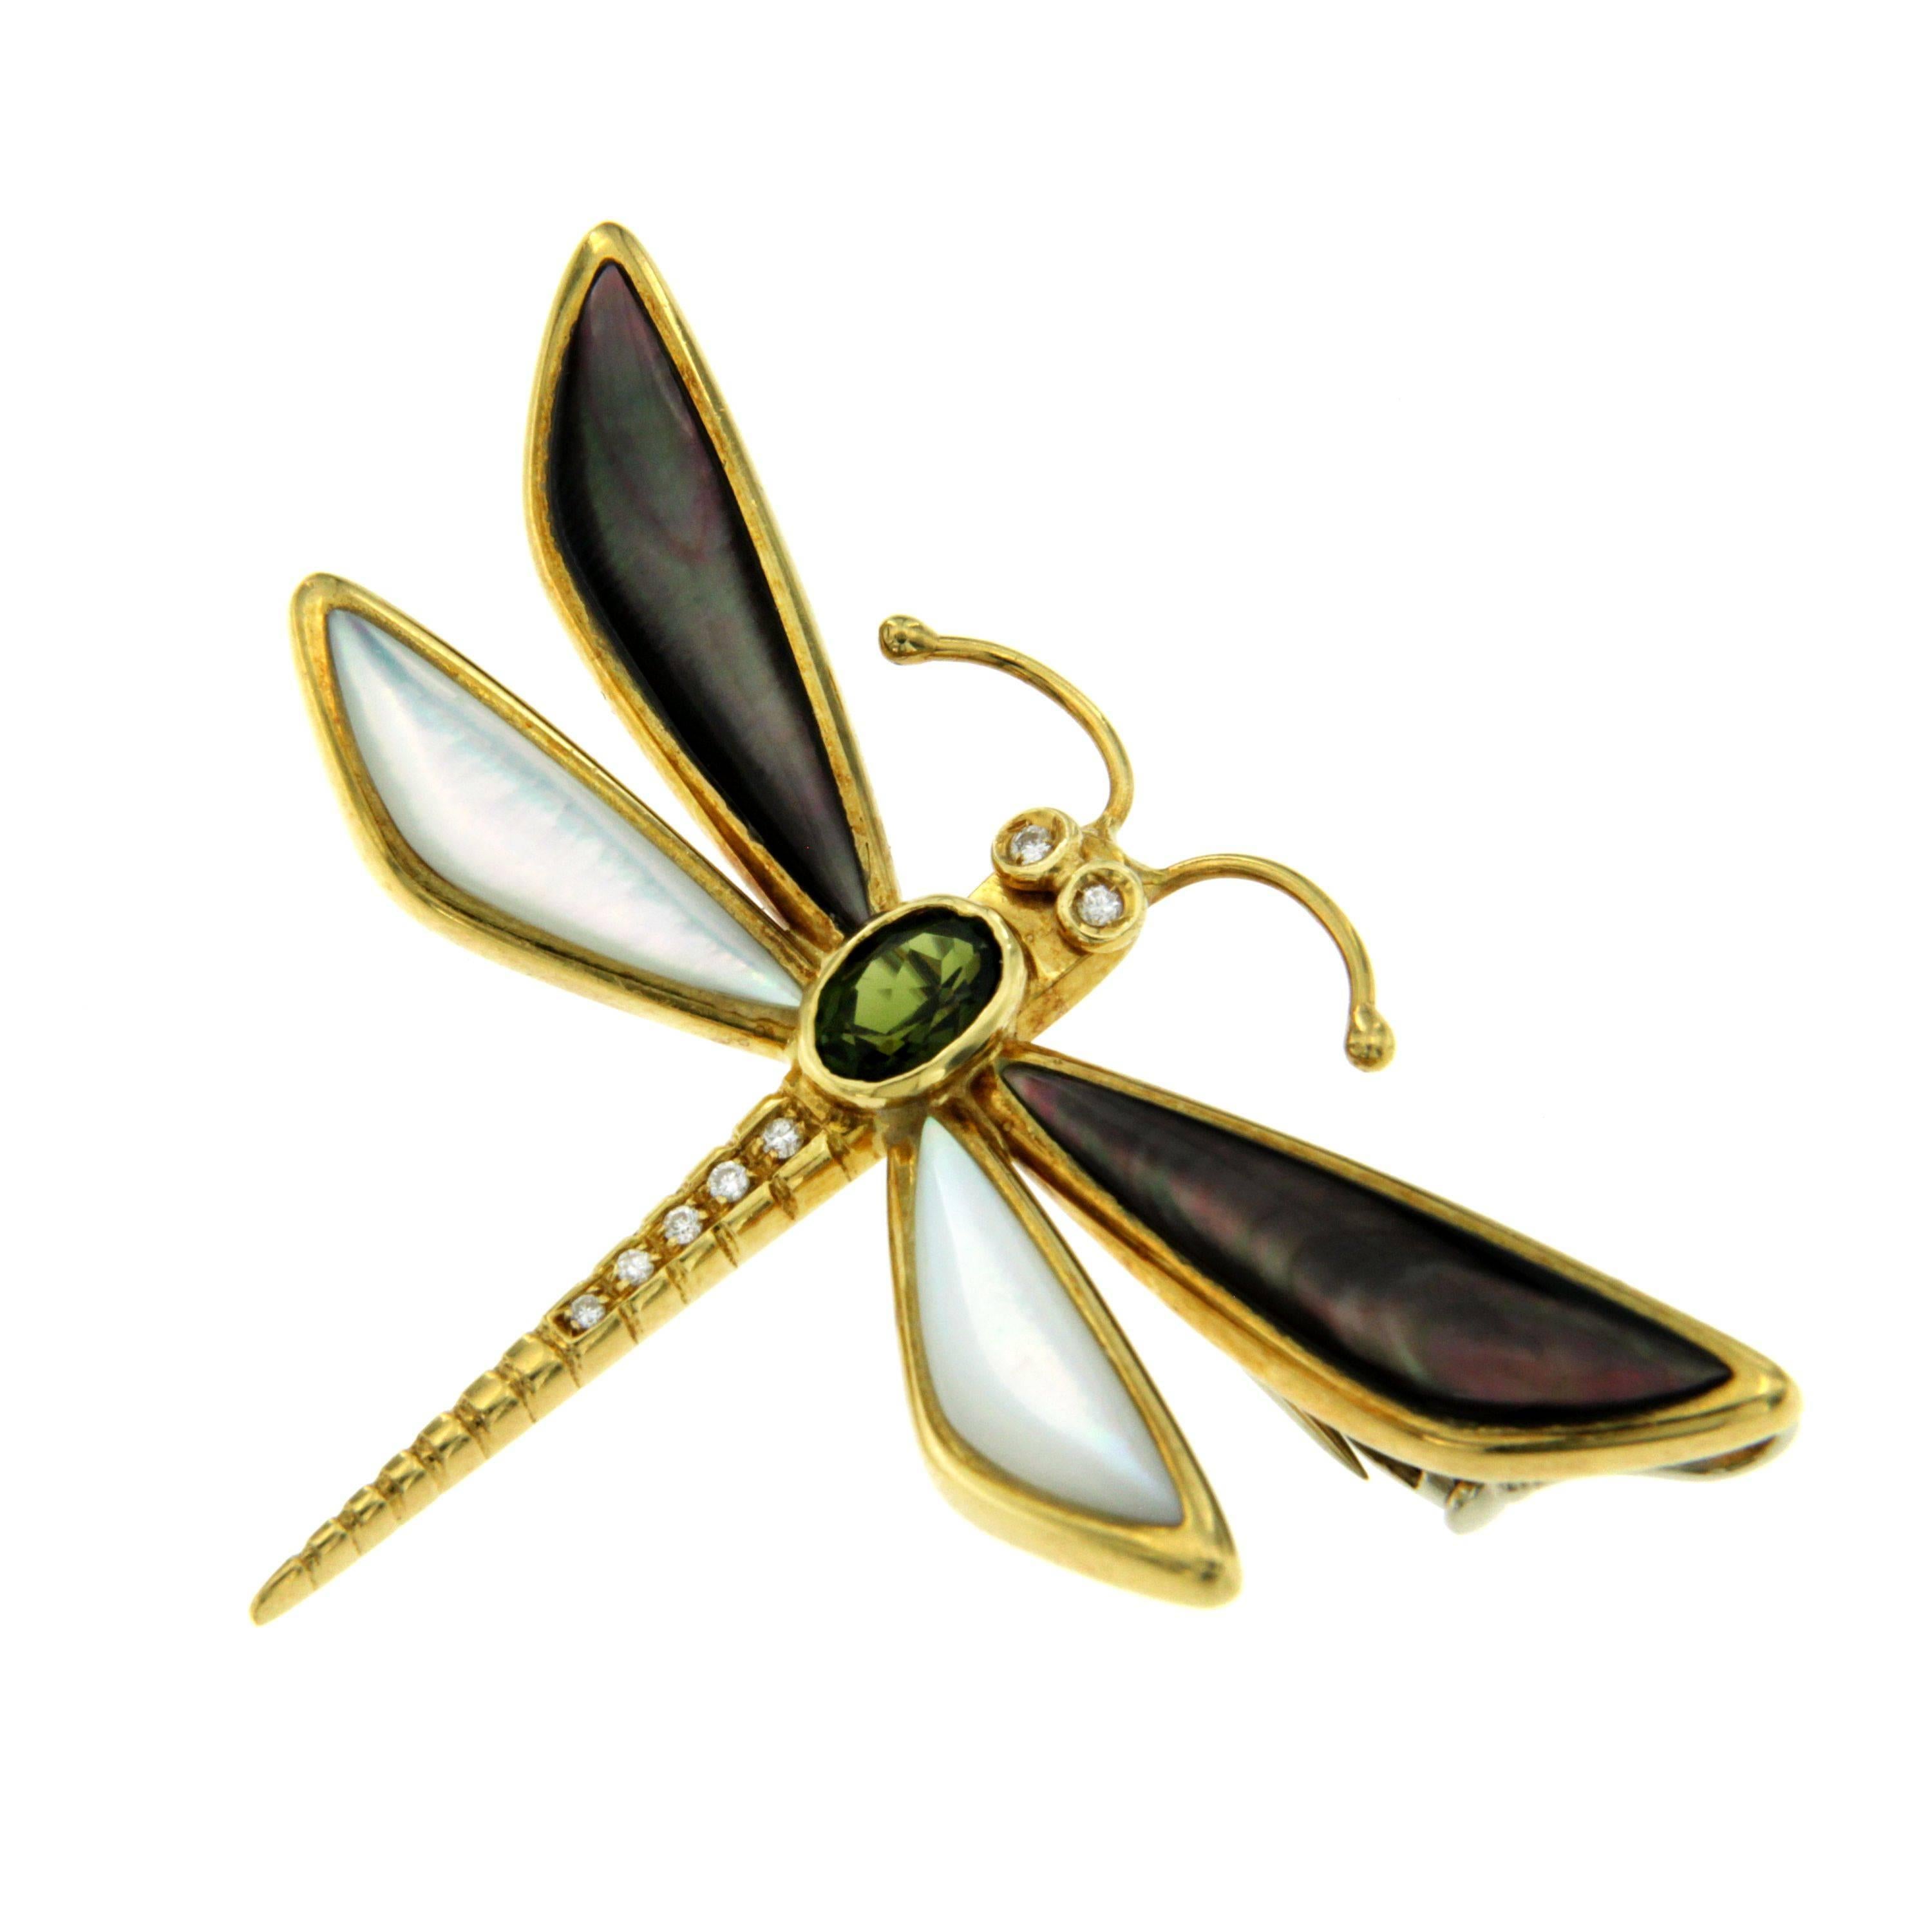 A beautiful Italian jewel in 18k Yellow Gold consisting of mother-of-pearl, 0.30 cts of round brilliant cut diamonds and a Peridot forming the body of a colourful butterfly, this piece is suitable both as brooch or as pendant.
Dating circa 1990